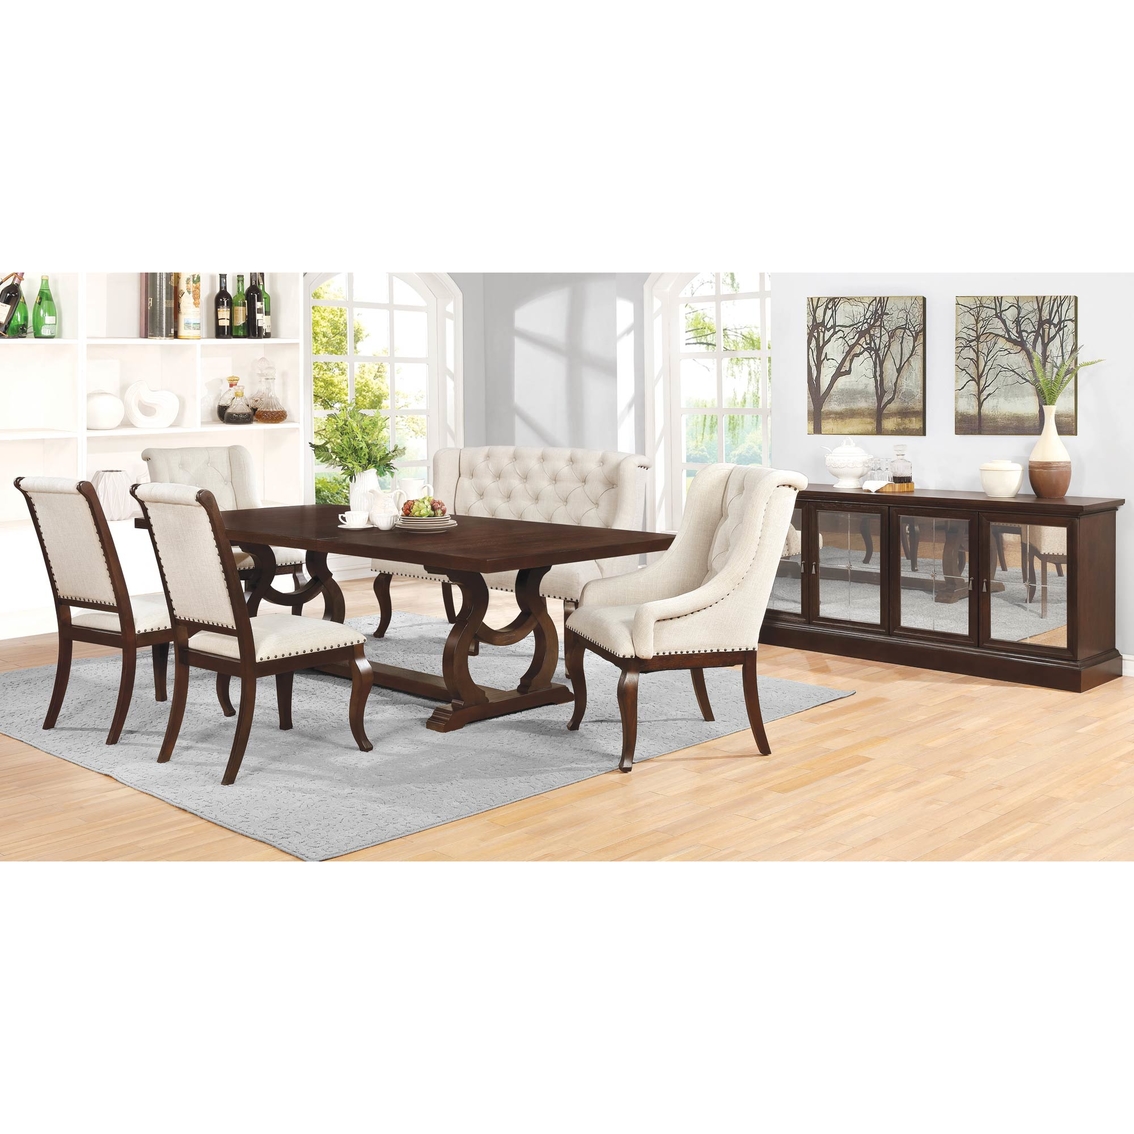 Coaster Glen Cove Traditional Trestle Table in Antique Java - Image 3 of 4